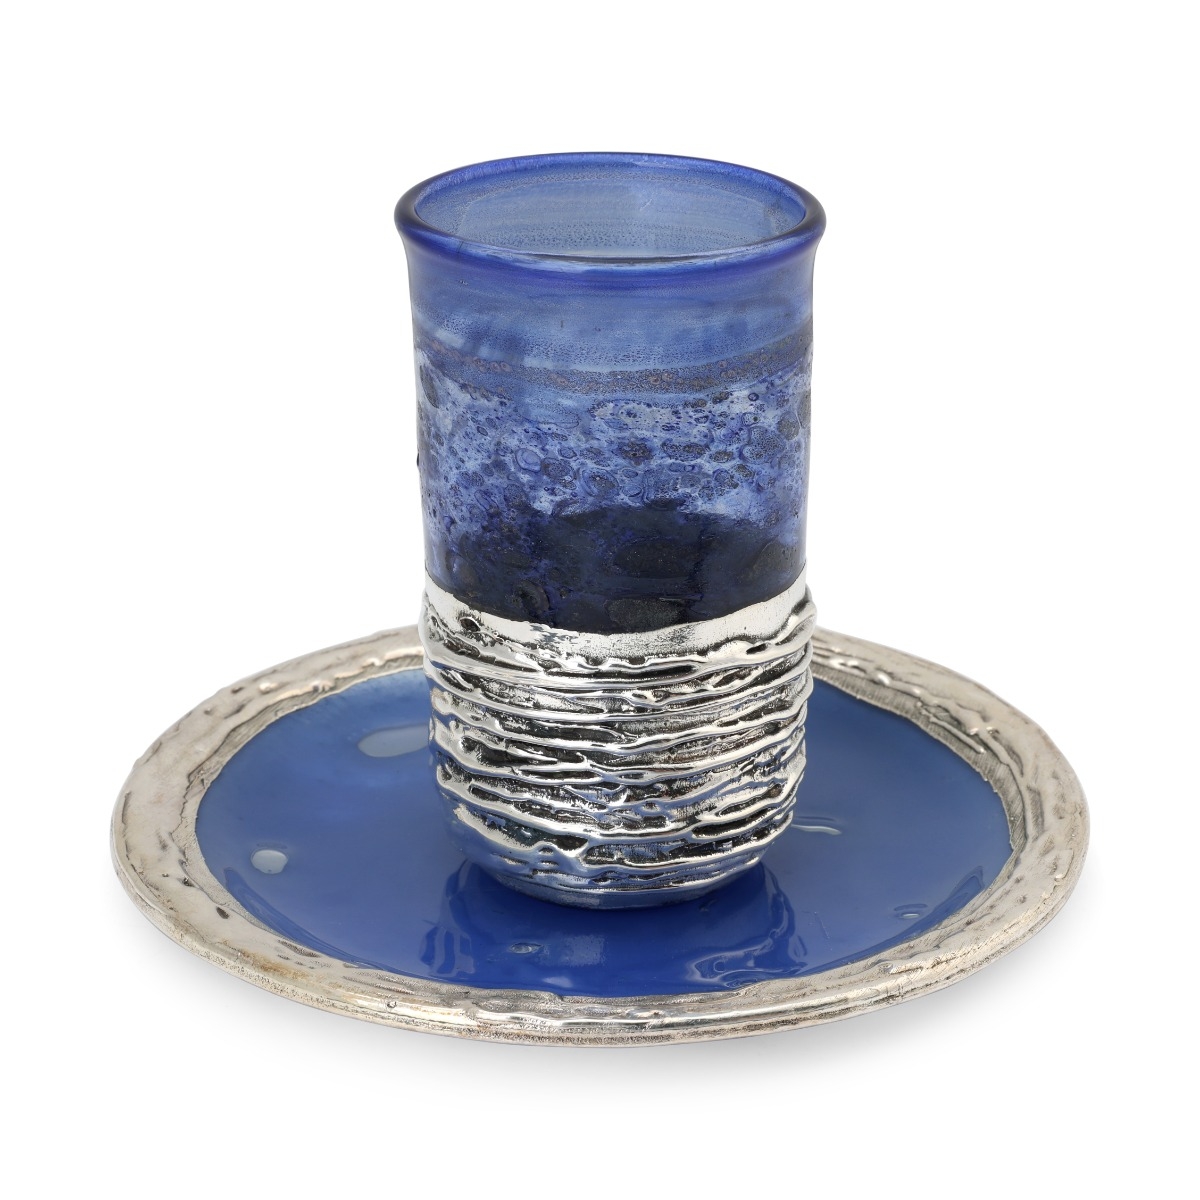 Handmade Dark Blue Glass and Sterling Silver-Plated Stemless Kiddush Cup - 1